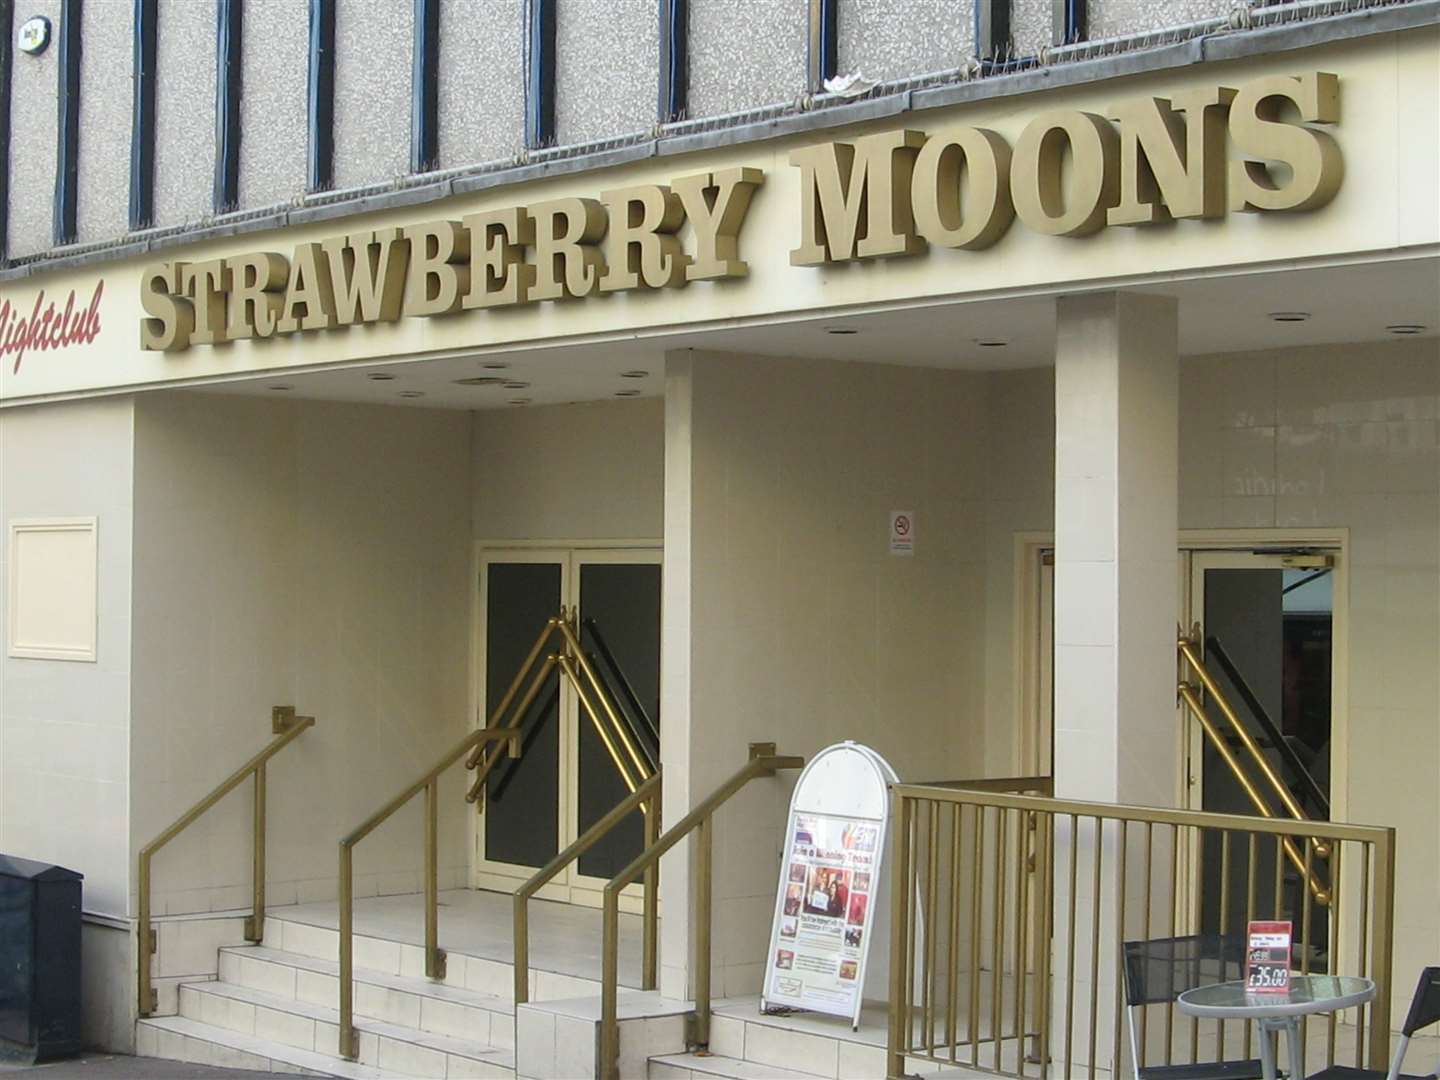 The old Strawberry Moons nightclub in Gabriel's Hill, Maidstone